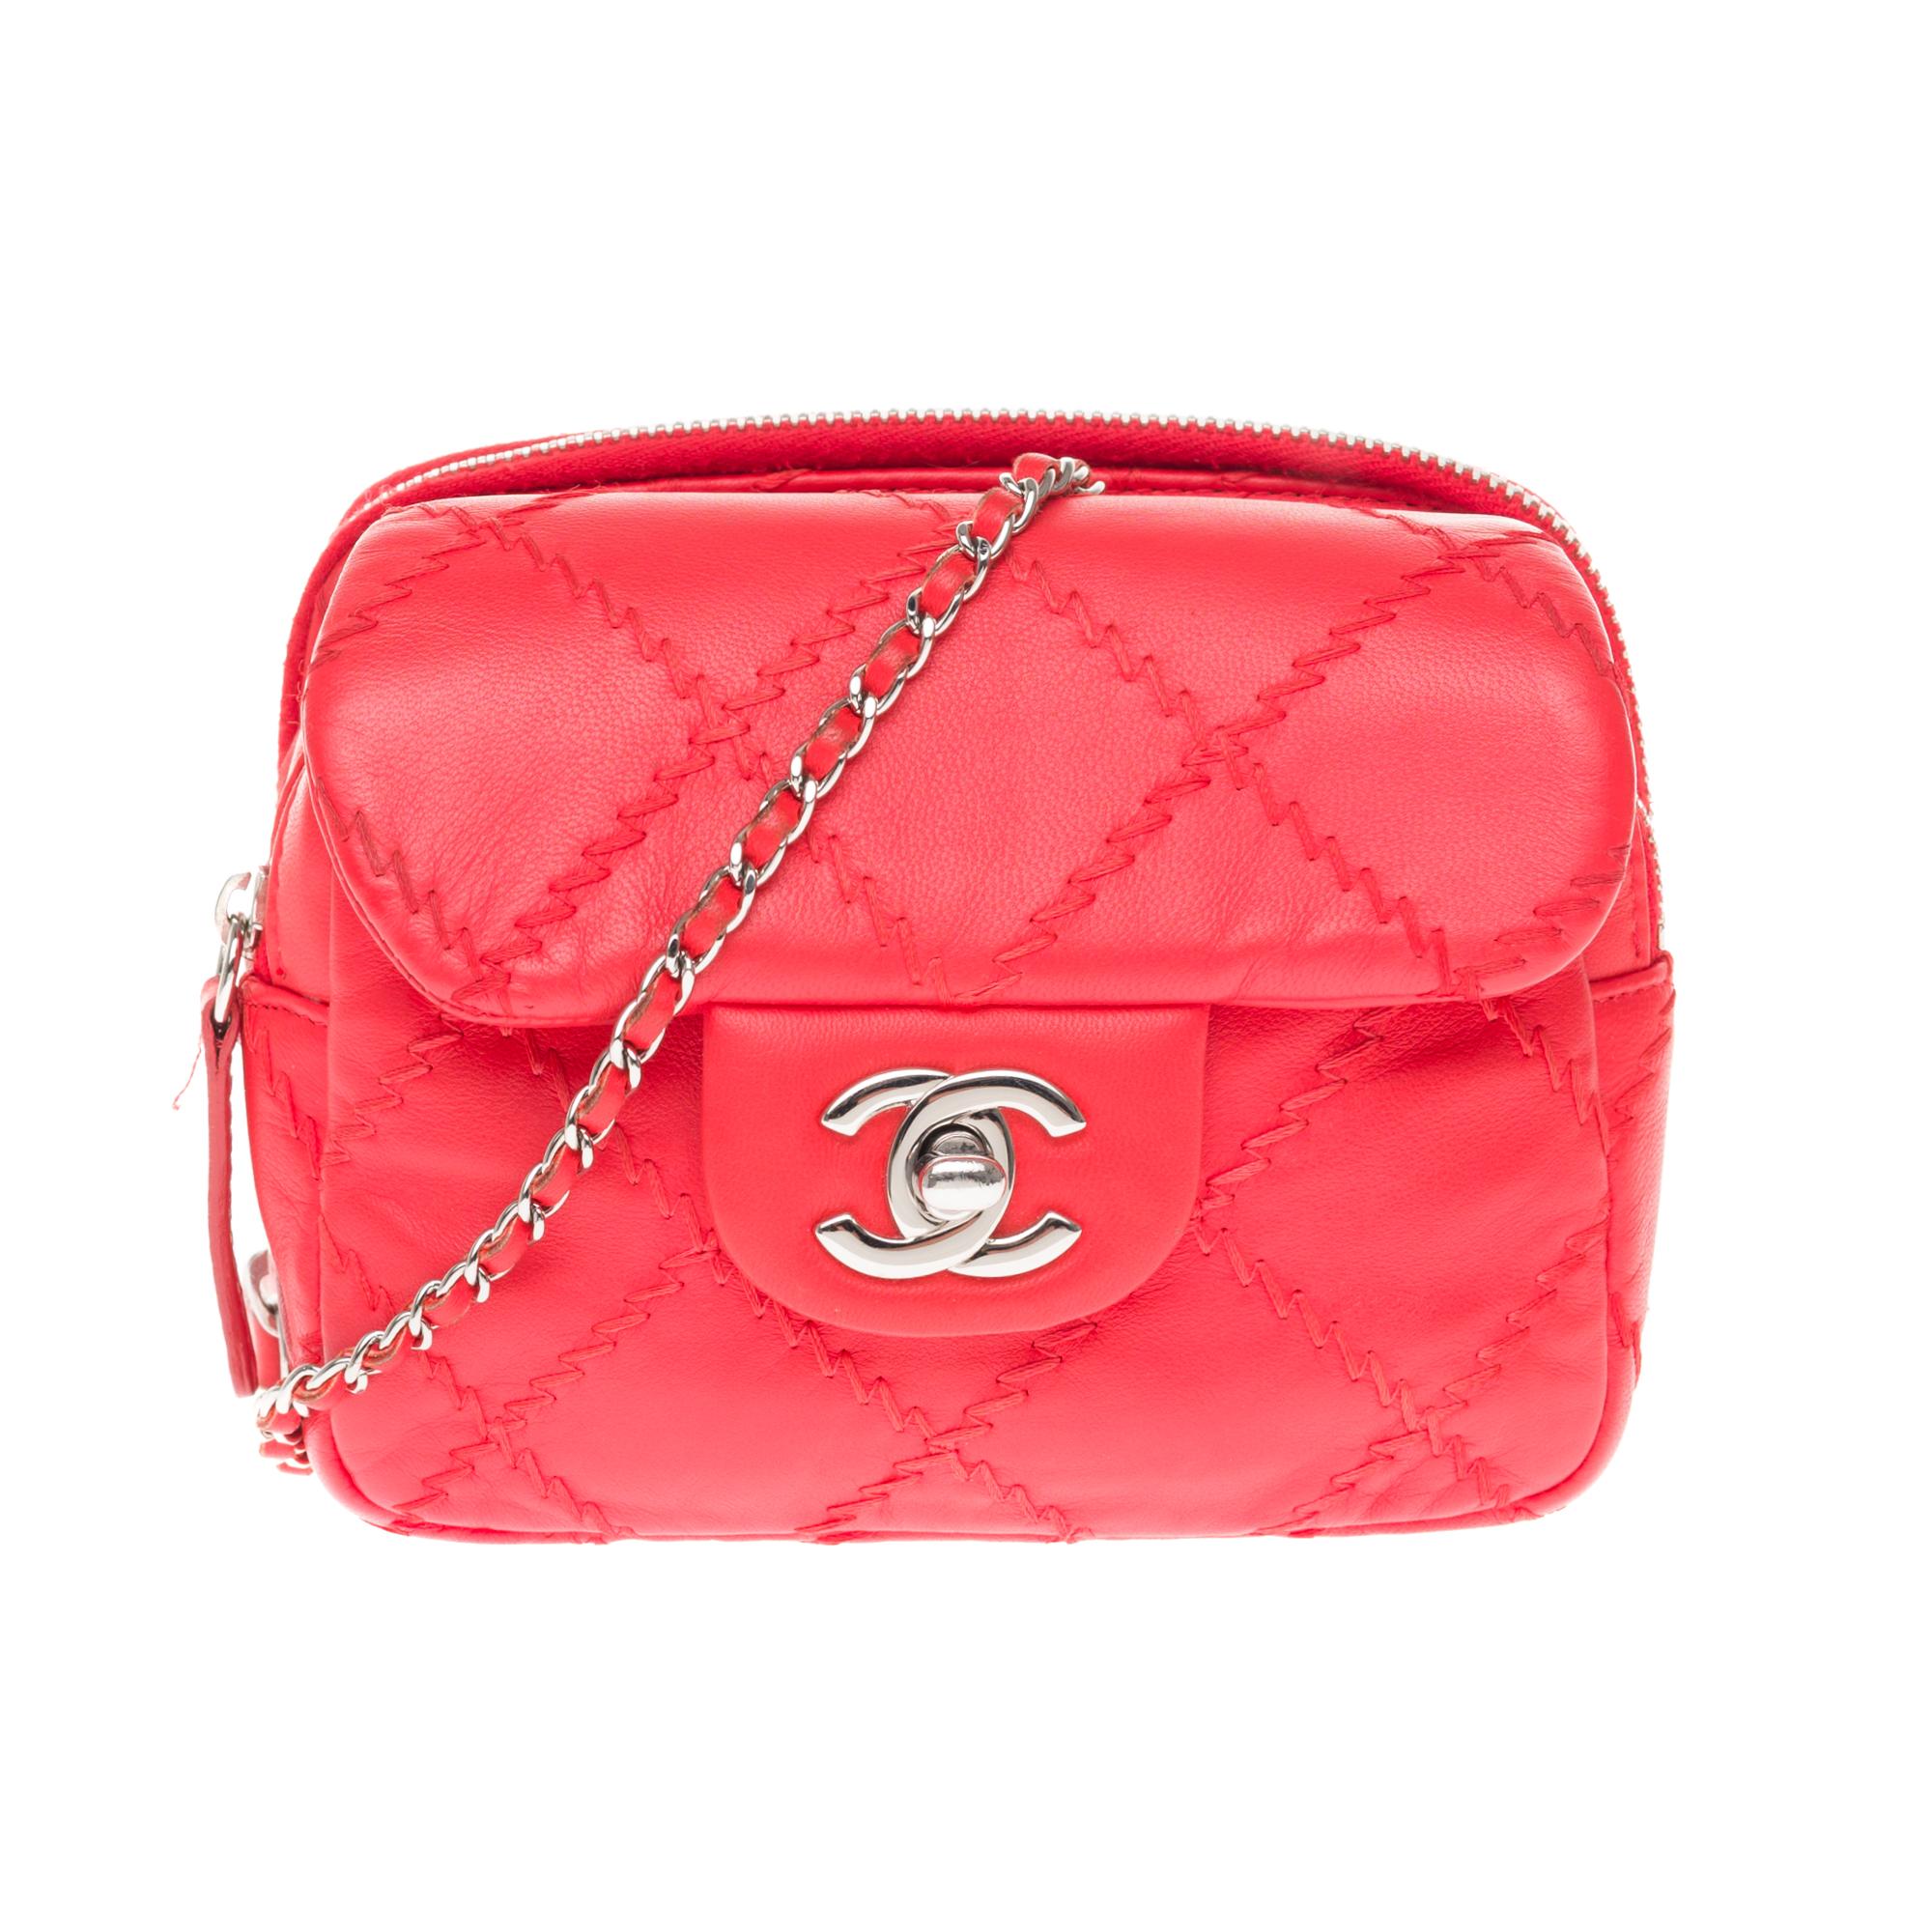 Lovely CHANEL Handbag/Wallet in red lambskin with zig zag stitching, 2 compartments with zippers, red fabric interior, silver metal trim, silver metal shoulder strap with red leather interlacing for a shoulder strap.
2 compartments: 1 compartment